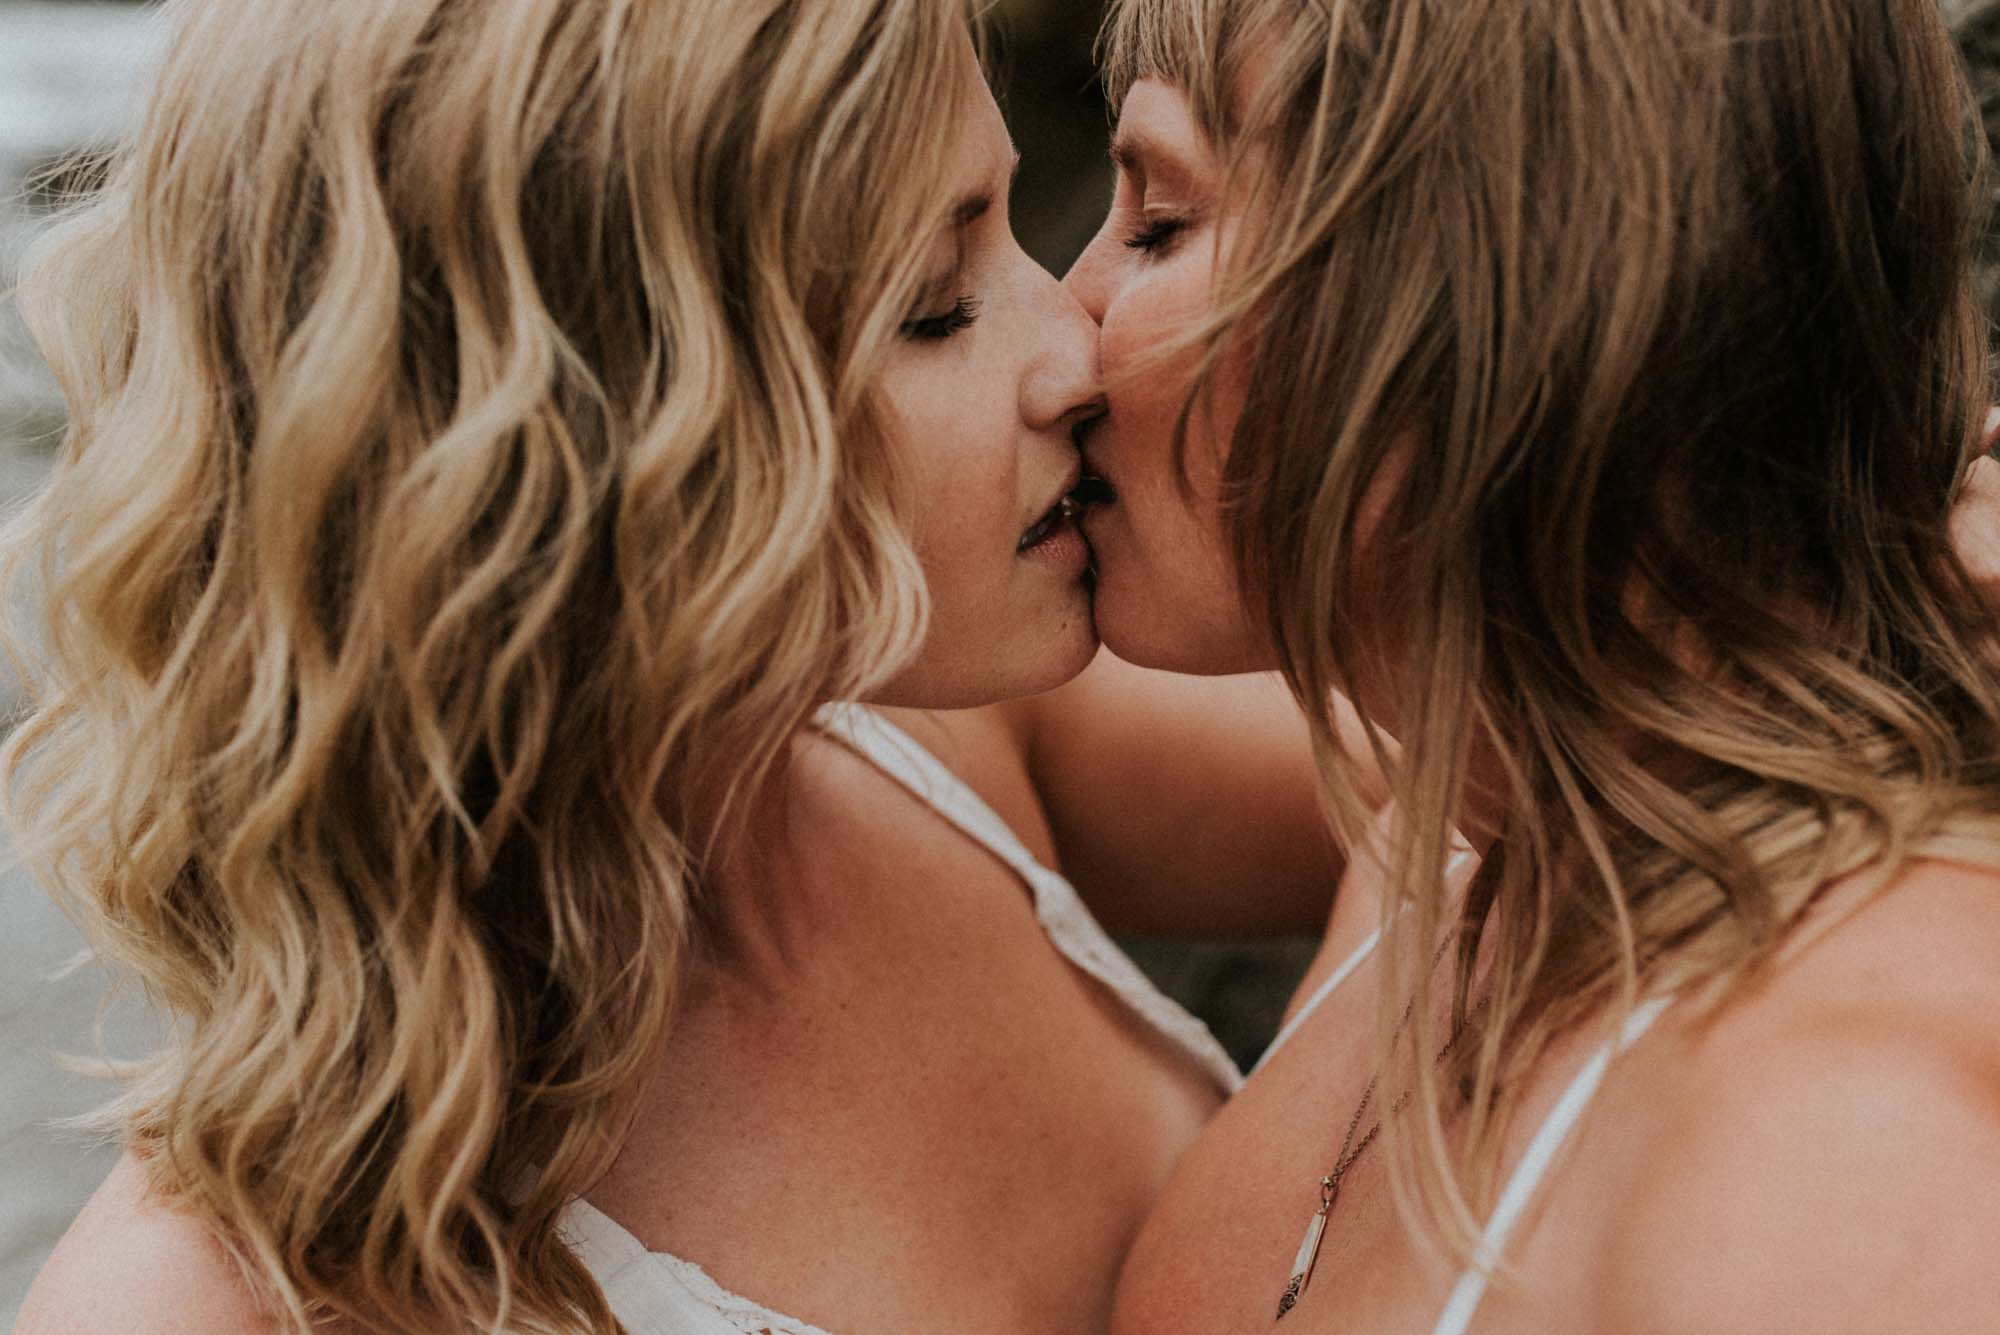 Magical engagement photo session in Big Sur. Photography by Heather K. Purdy. Featured on Equally Wed, the leading LGBTQ+ wedding magazine and wedding vendor directory of LGBTQ+ inclusive wedding pros. romantic sexy image includes two blonde women in love in white outfits on beach